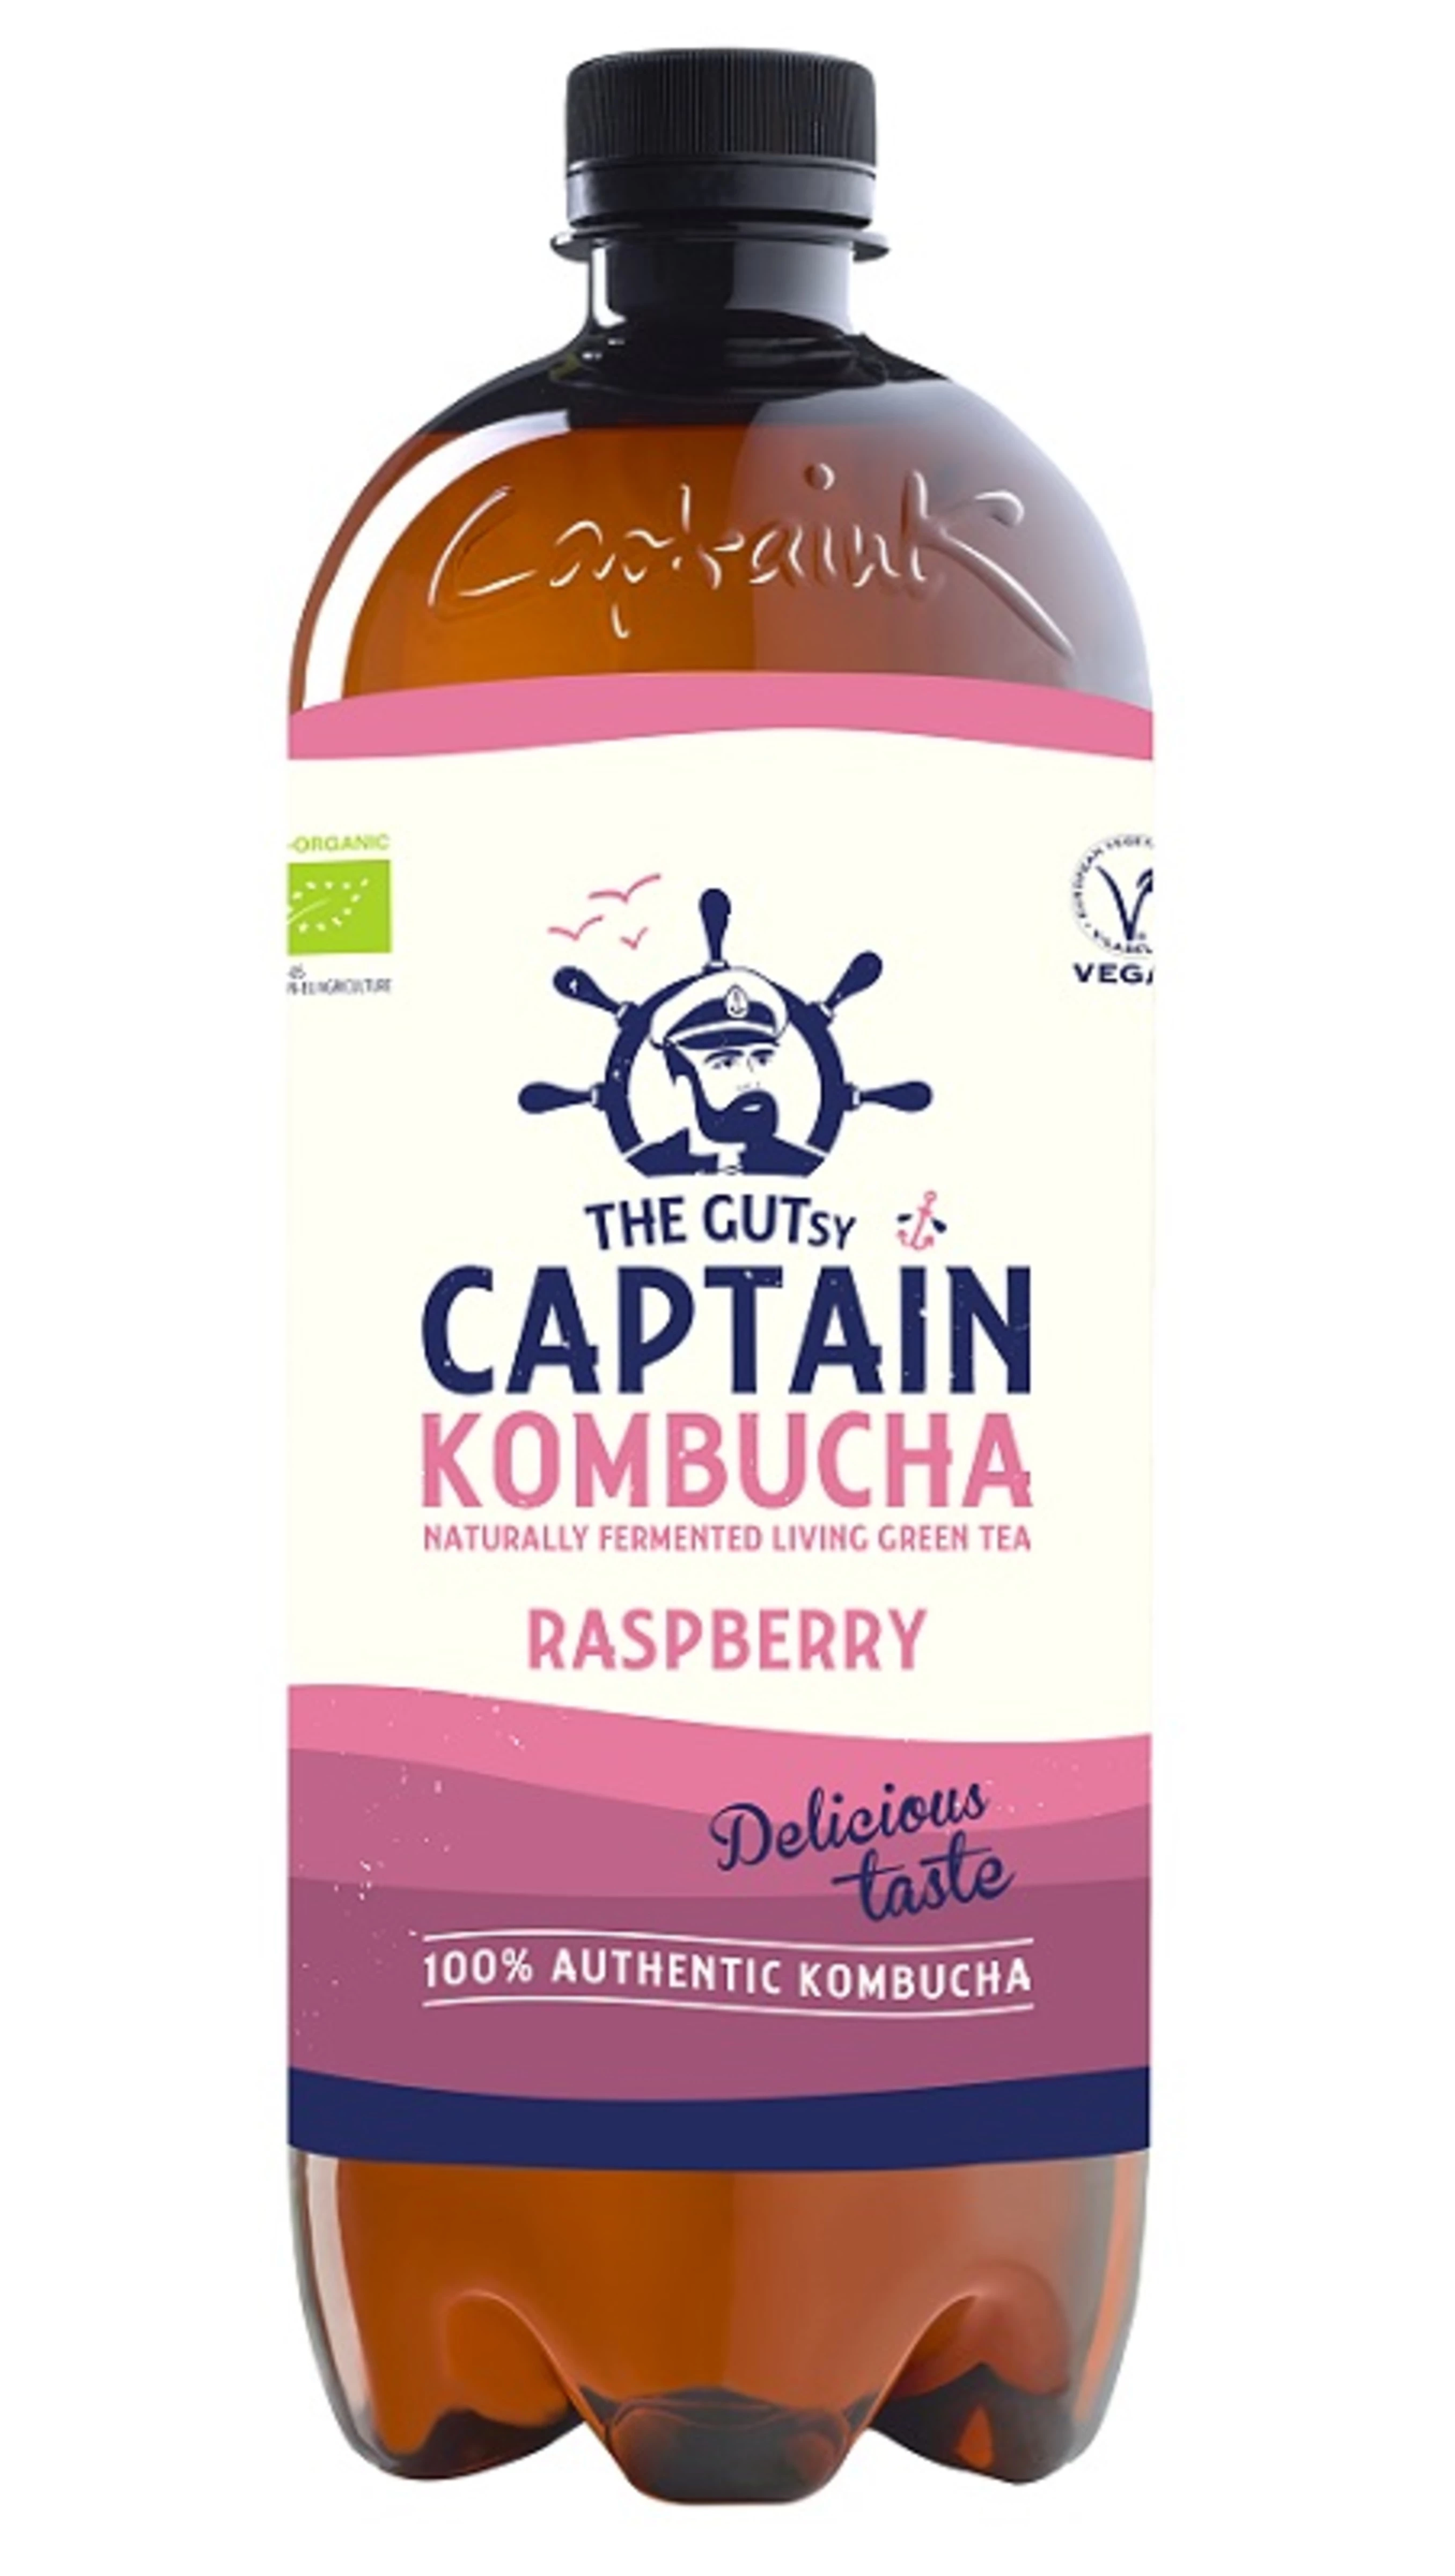 Natural Fermented Drink with Organic Raspberry Kombucha 1l - THE GUTSY CAPTAIN